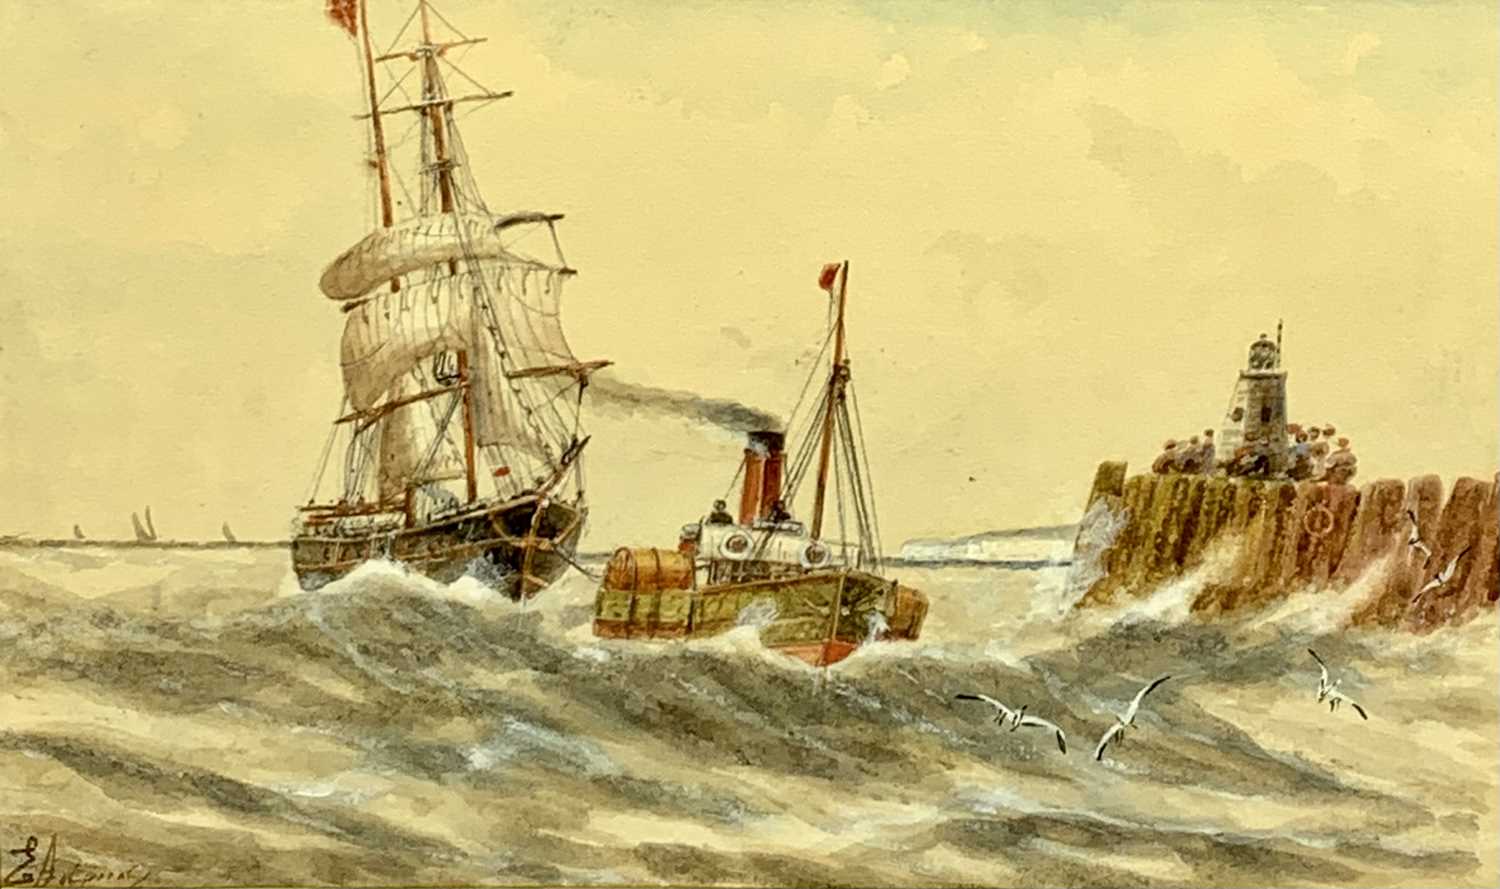 W G PIERCE watercolour - the Barquentine Varovic preparing to leave Porthmadog after discharging - Image 3 of 4